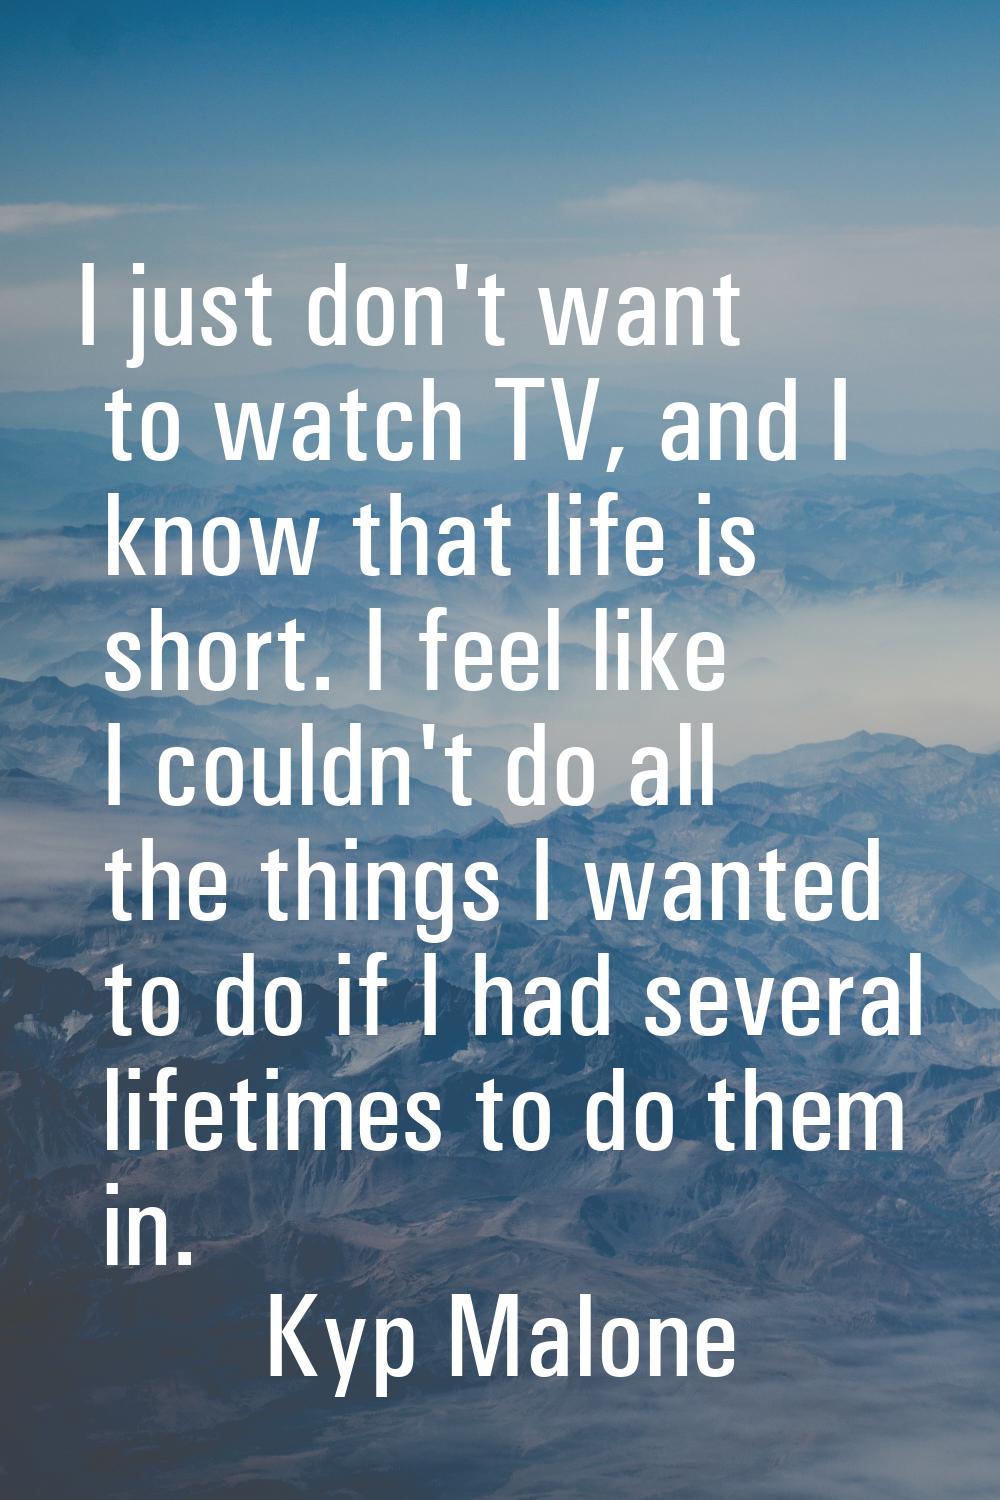 I just don't want to watch TV, and I know that life is short. I feel like I couldn't do all the thi